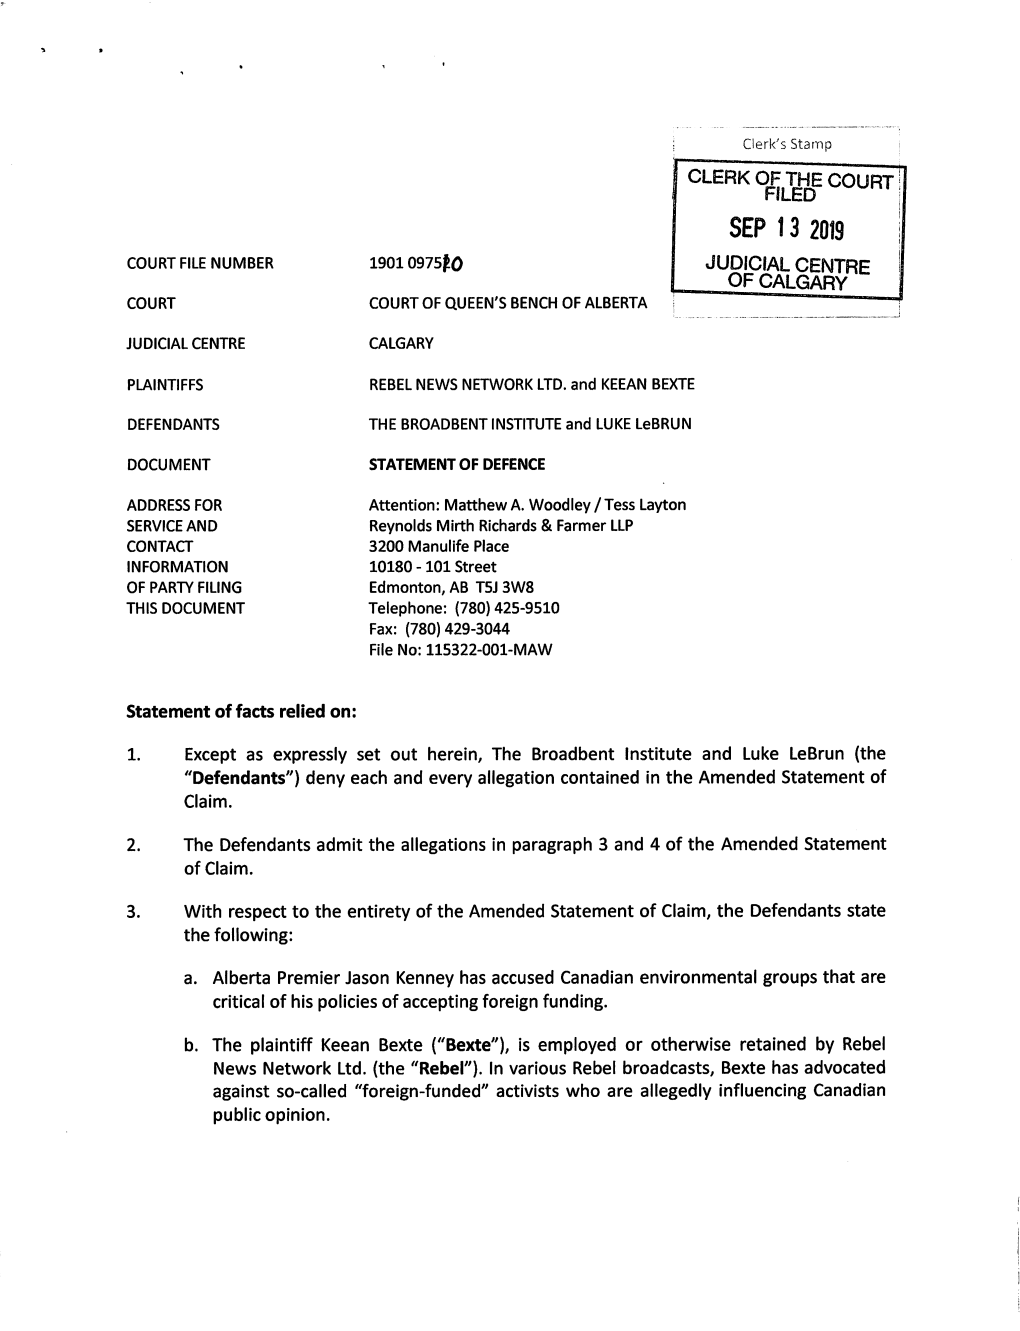 Filed Statement of Defence.Pdf